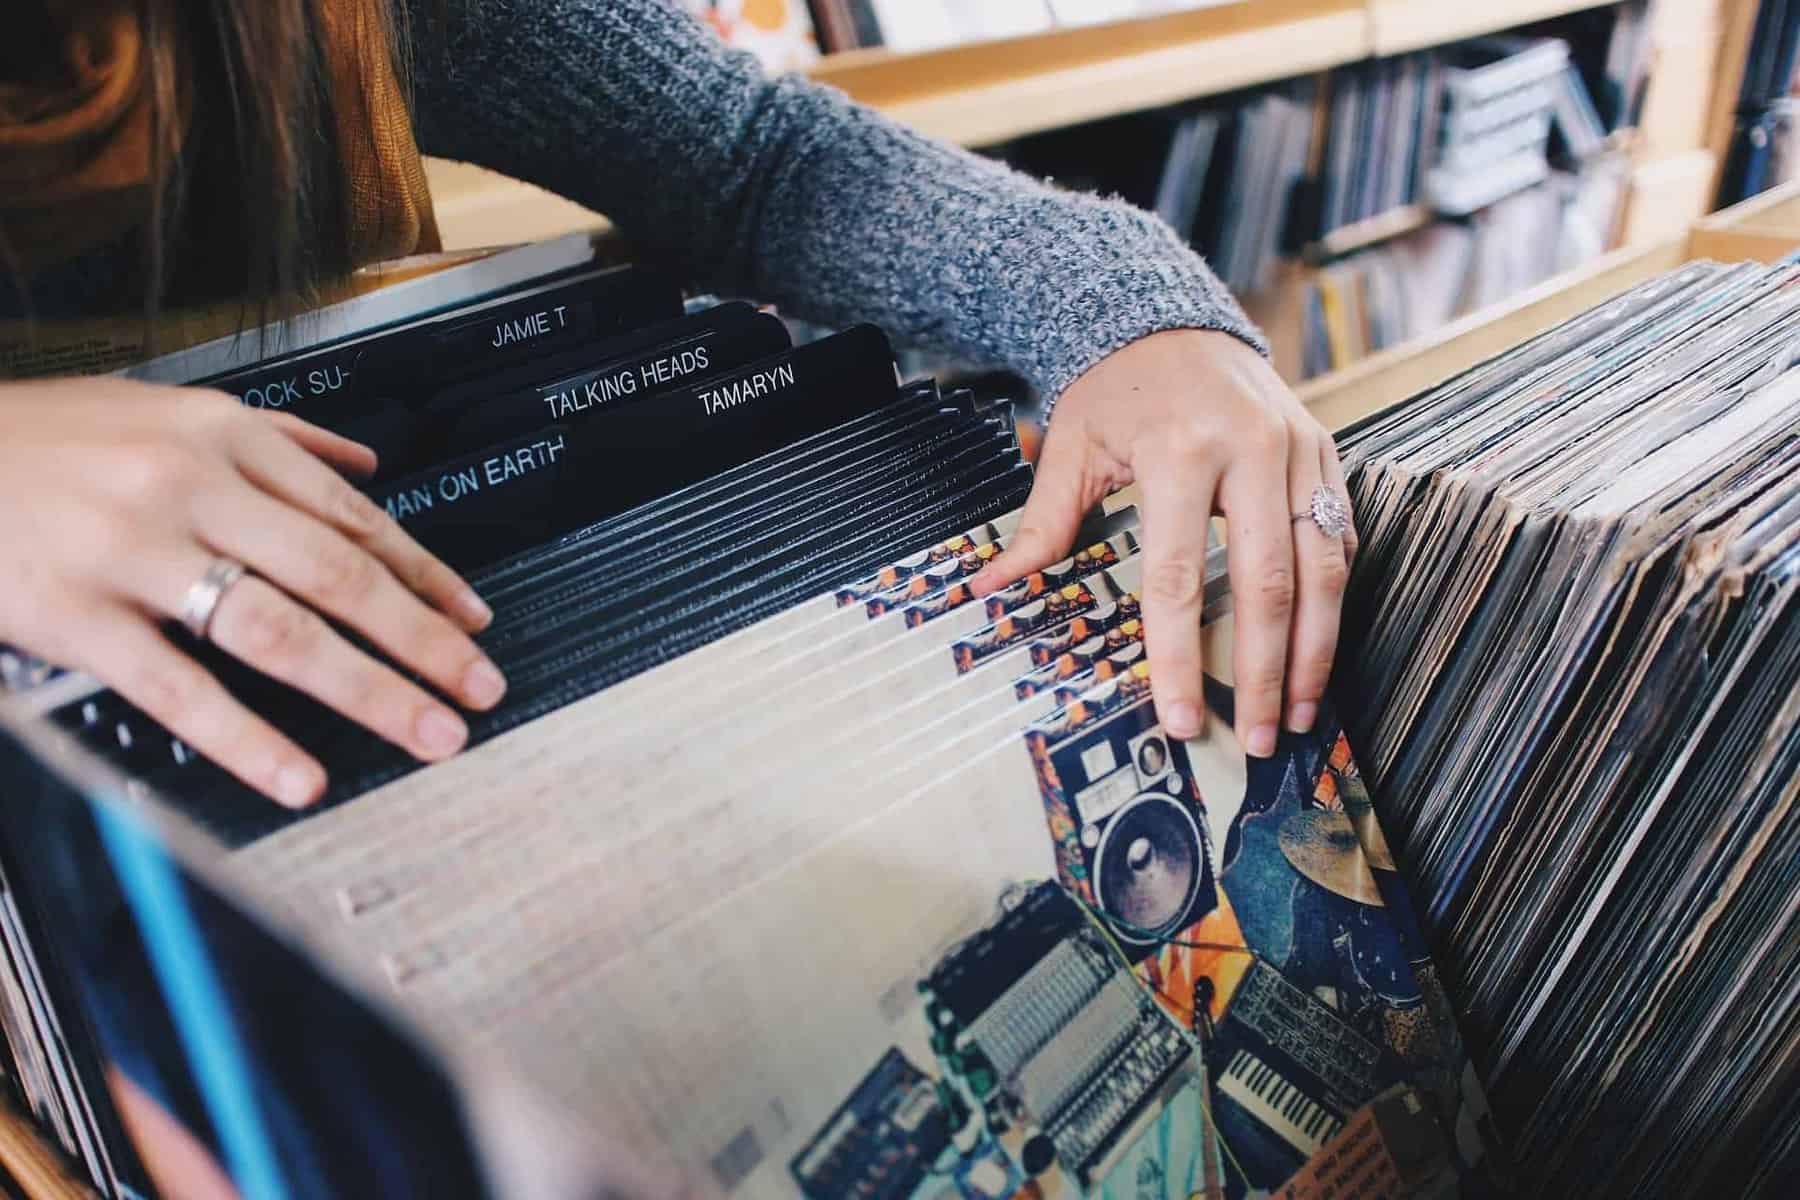 Vinyl’s are back! But are they here to stay?